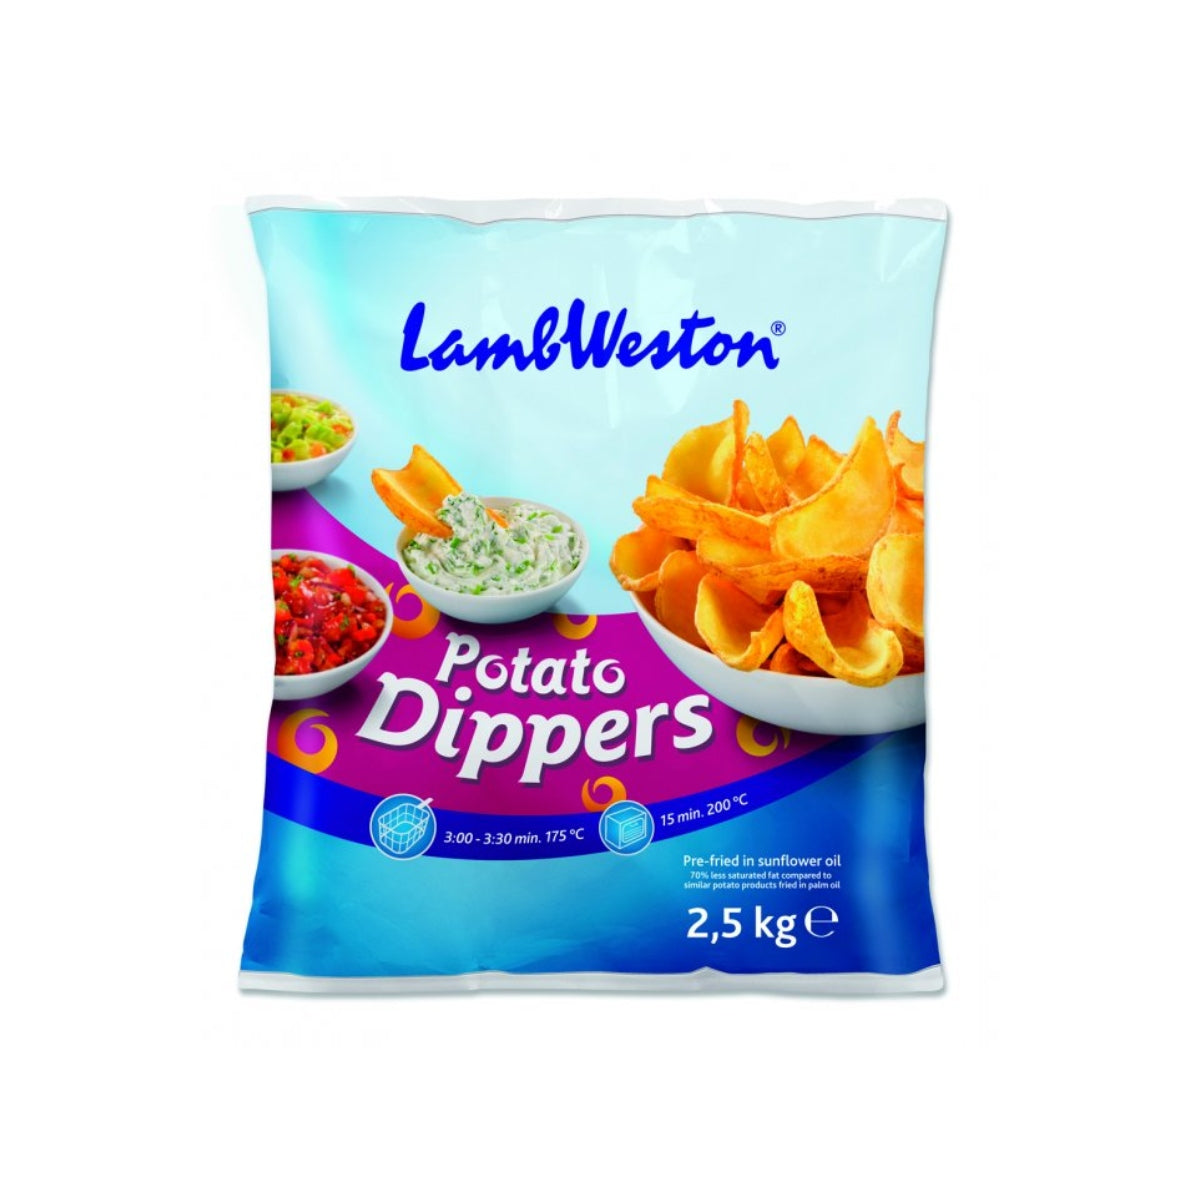 Potato Dippers Skin On, Thin 2.5kg